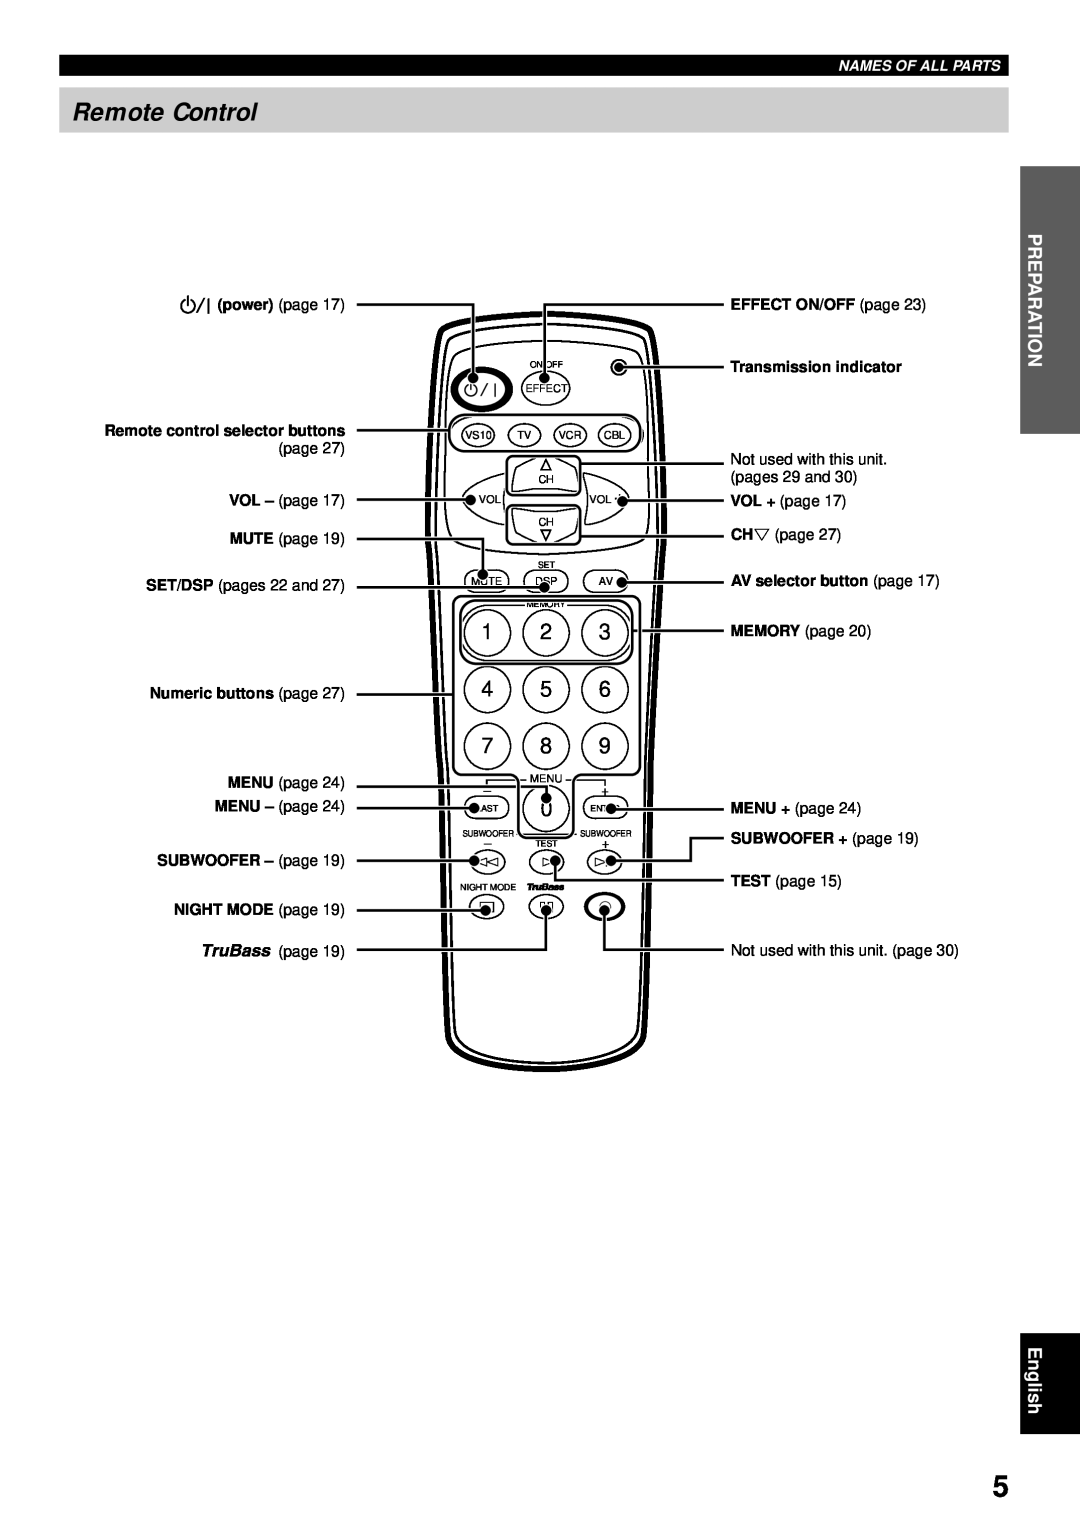 Yamaha VS-10 Remote Control, Preparation, English, p power page, Transmission indicator, Remote control selector buttons 